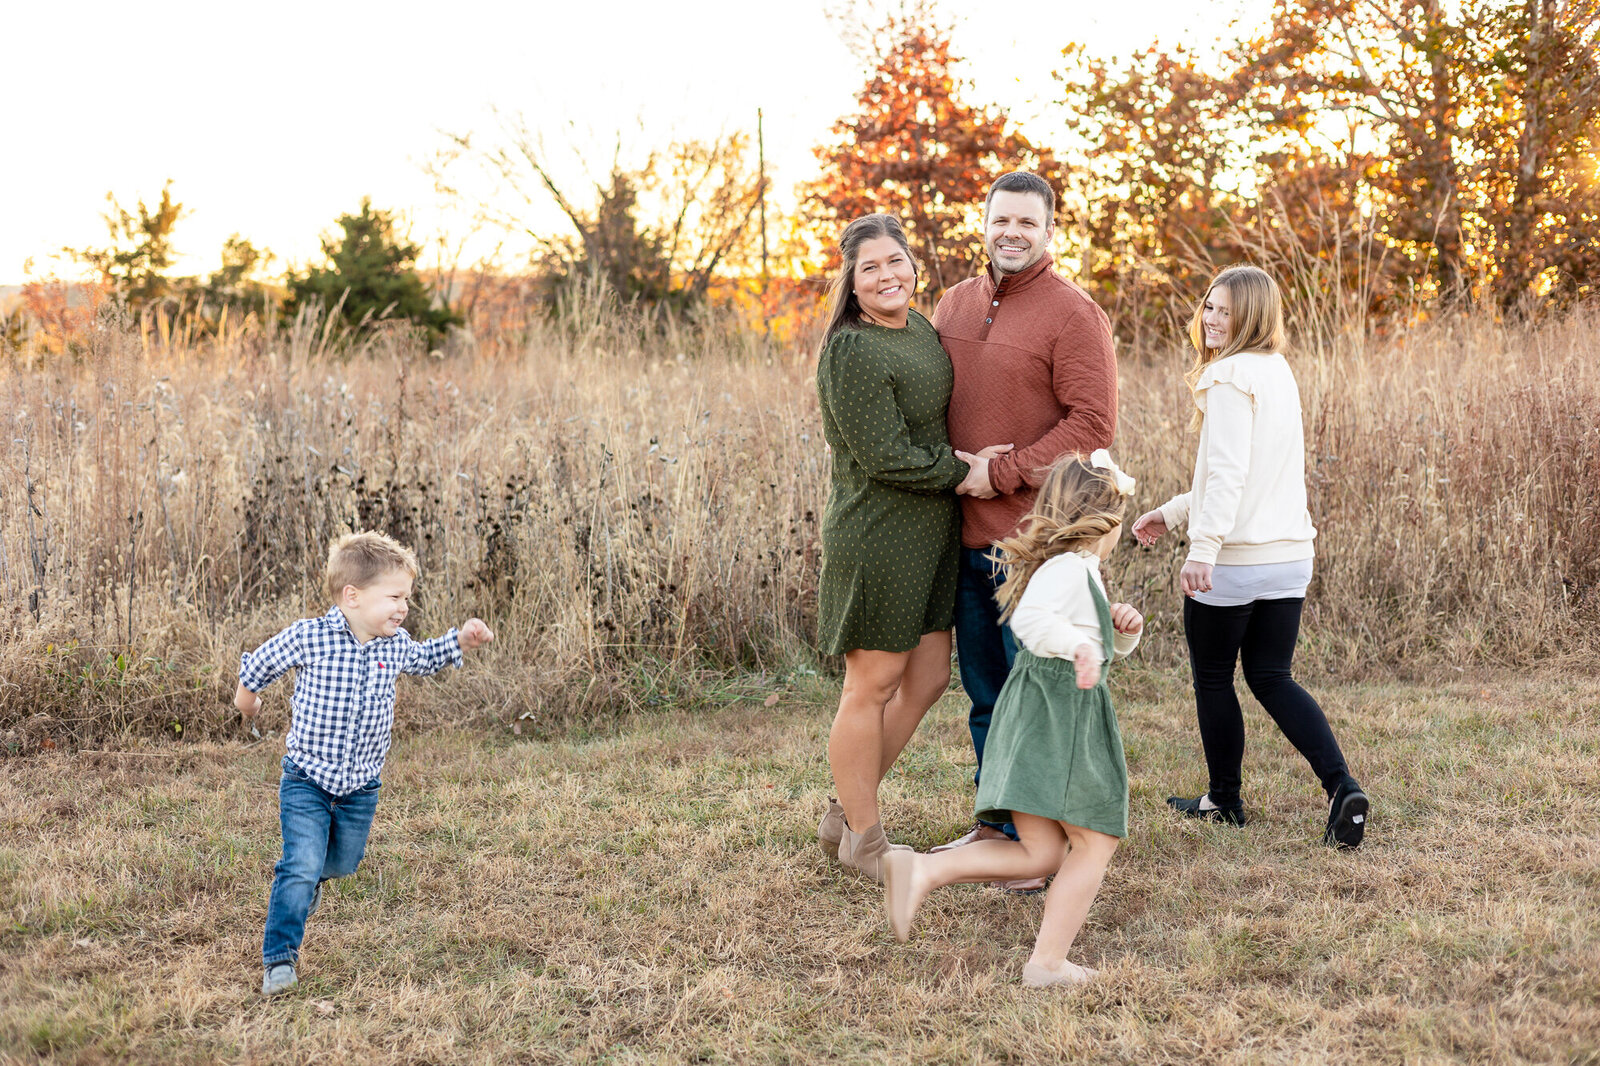 Outdoor-family-lifestyle-photography-session-Frankfort-KY-photographer-golden-hour-2